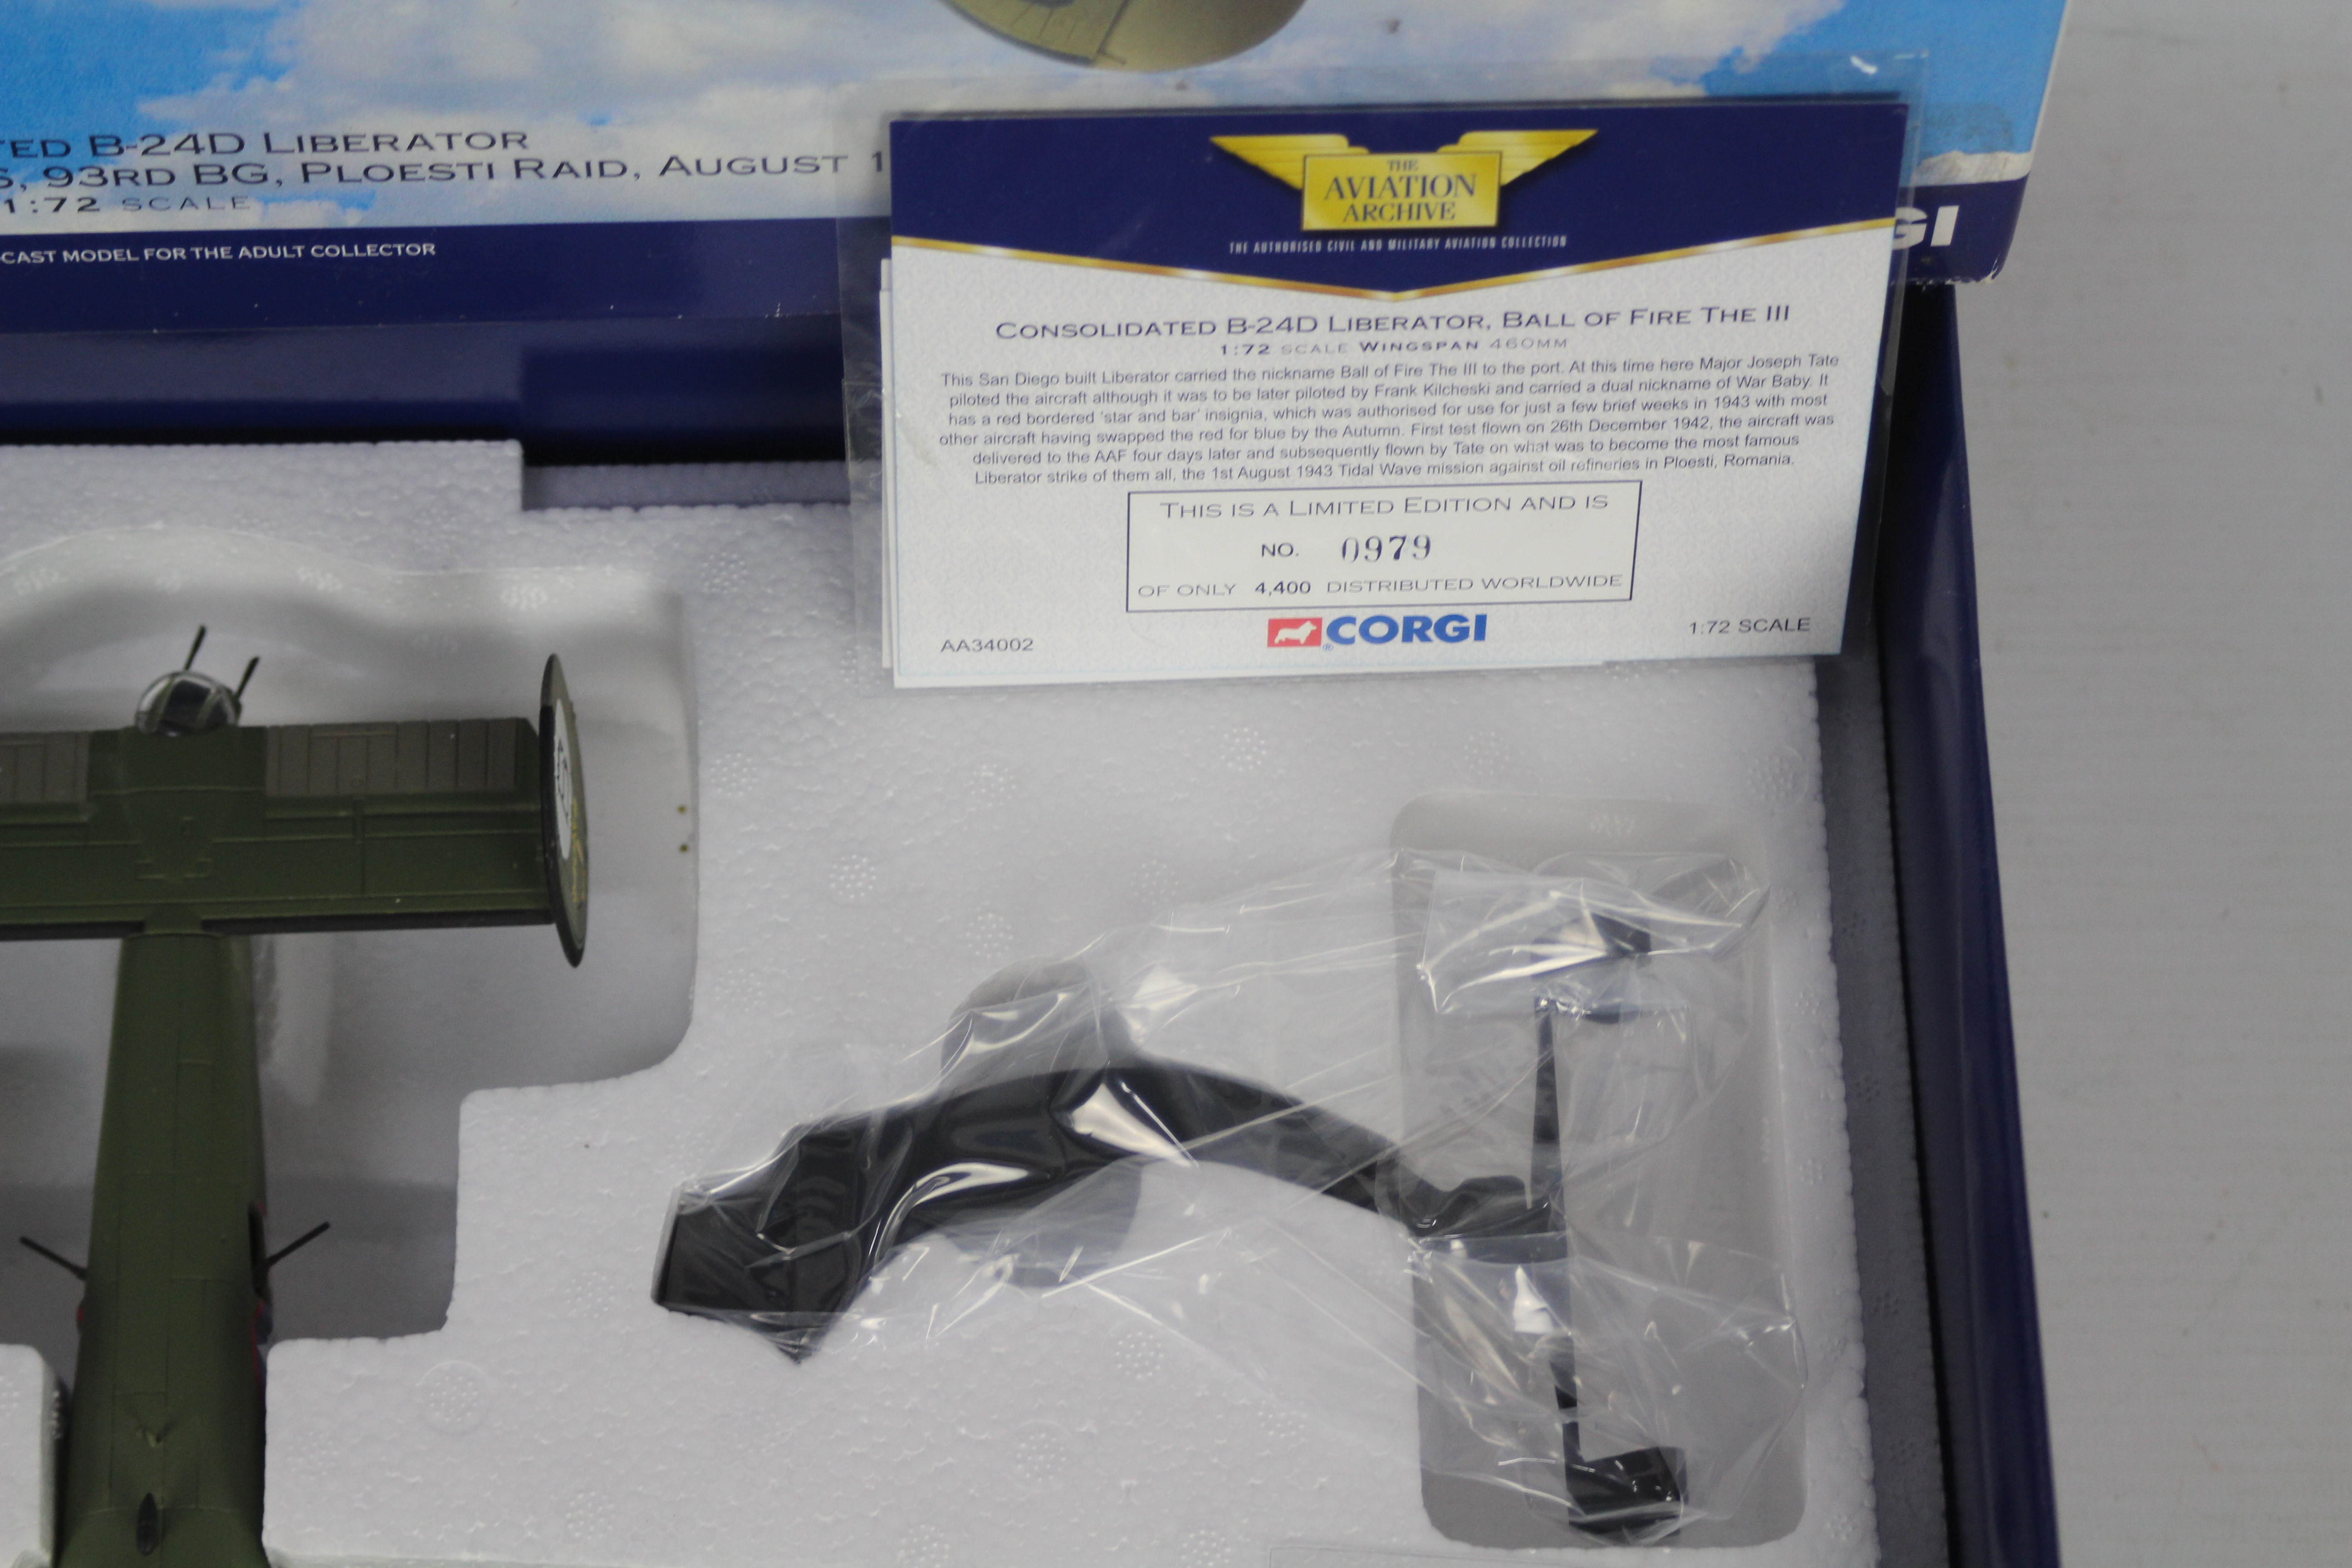 Corgi Aviation Archive - A boxed Limited Edition 1:72 scale AA34002 Consolidated B-24D Liberator, - Image 4 of 6